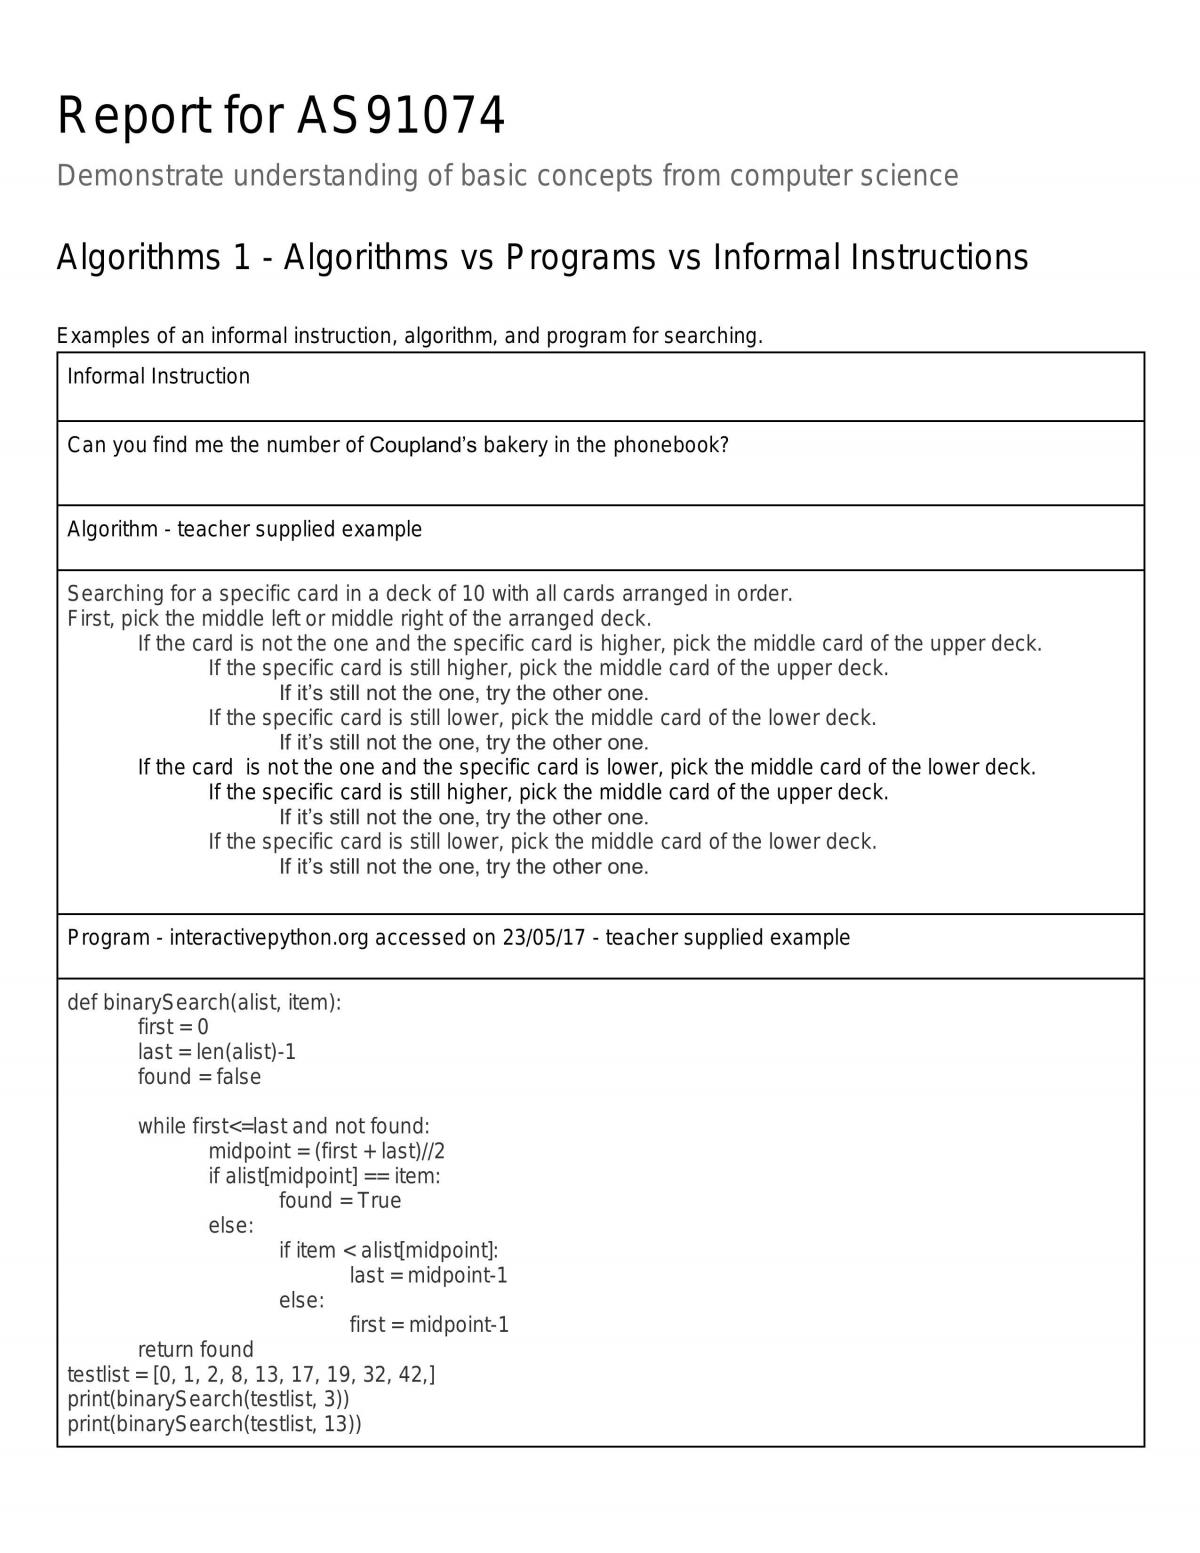 Algorithms Report for Level 1 Digital Technologies AS91074 - Page 1